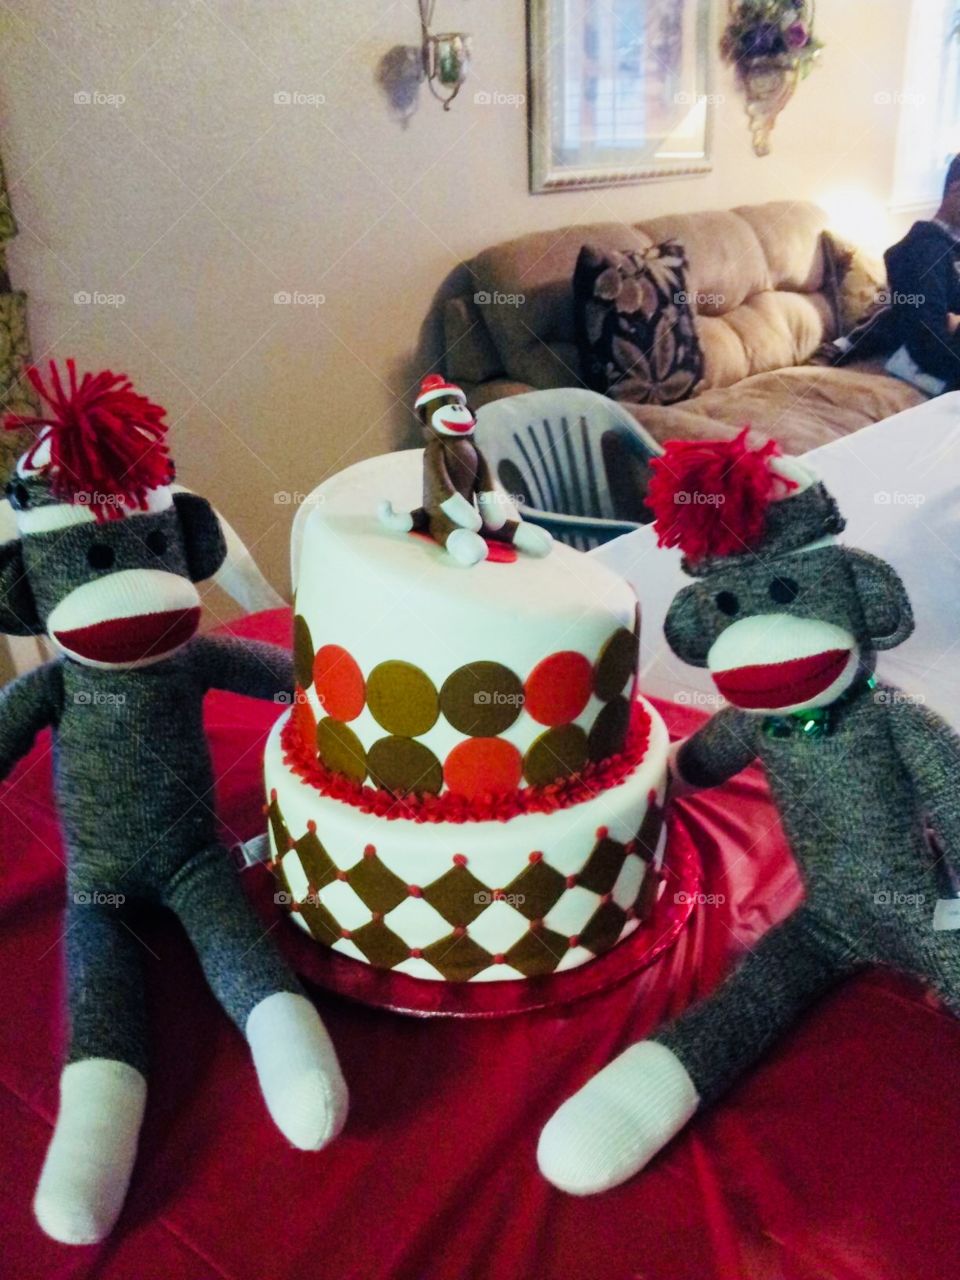 Sock Monkey cake for a baby shower 